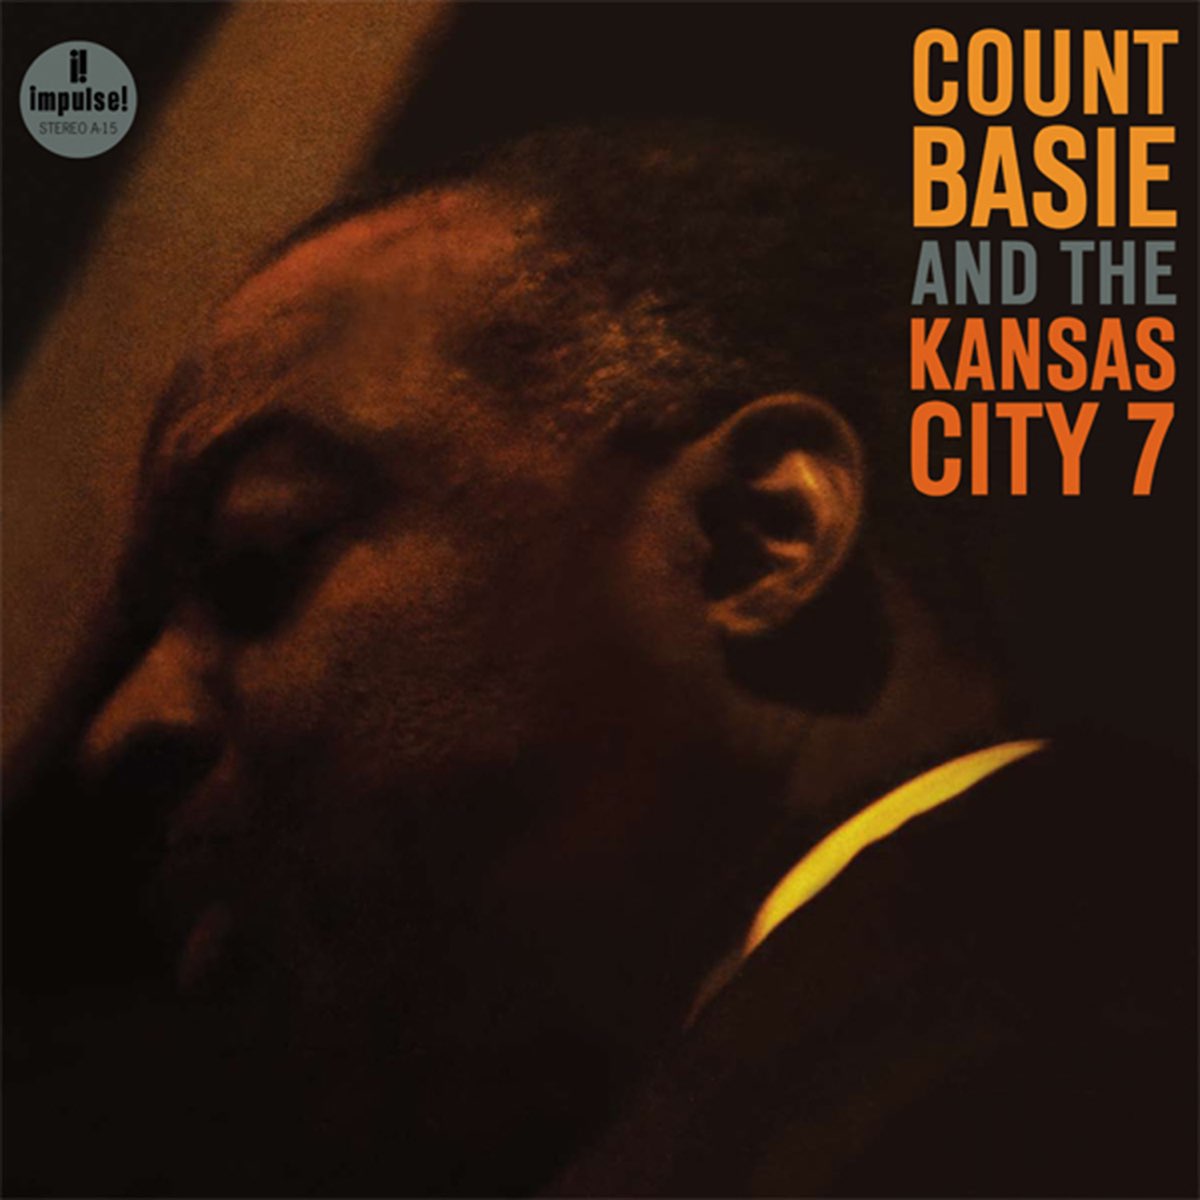 Count Basie And The Kansas City 7 by Count Basie & The Kansas City Seven on  Apple Music